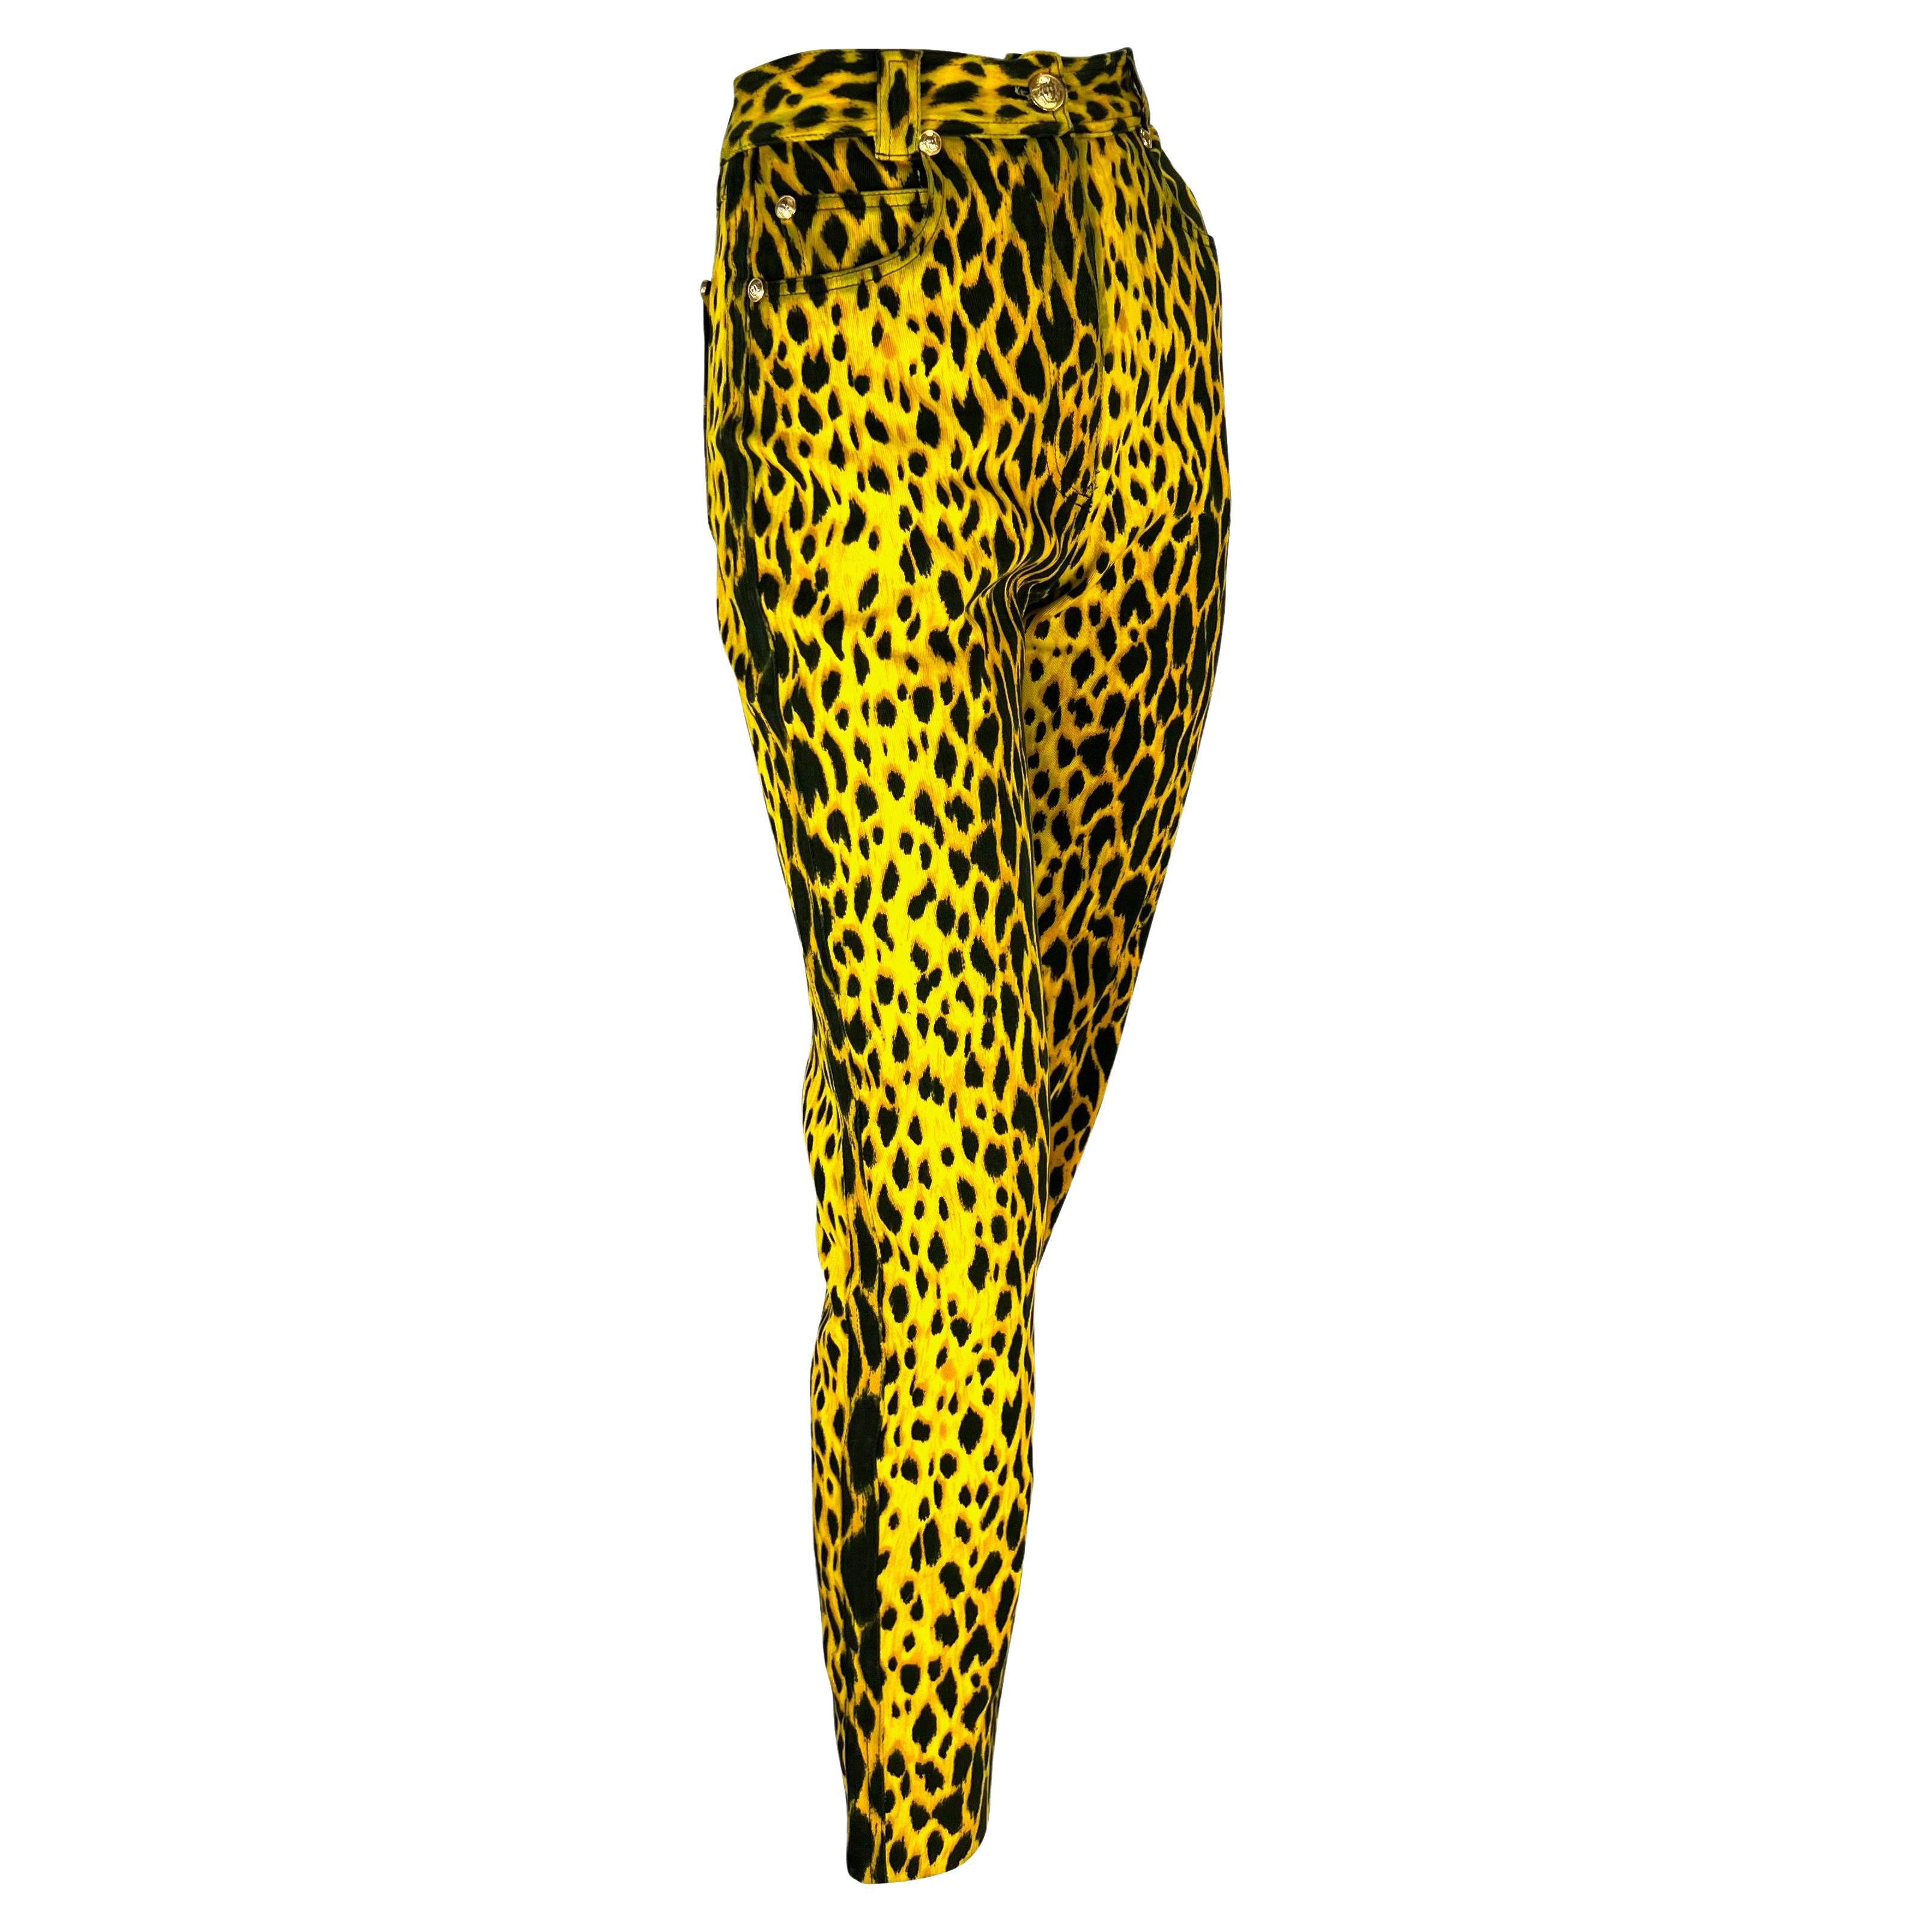 S/S 1992 Gianni Versace Runway Cheetah Print Yellow Black Cotton Stretch Jeans For Sale 2